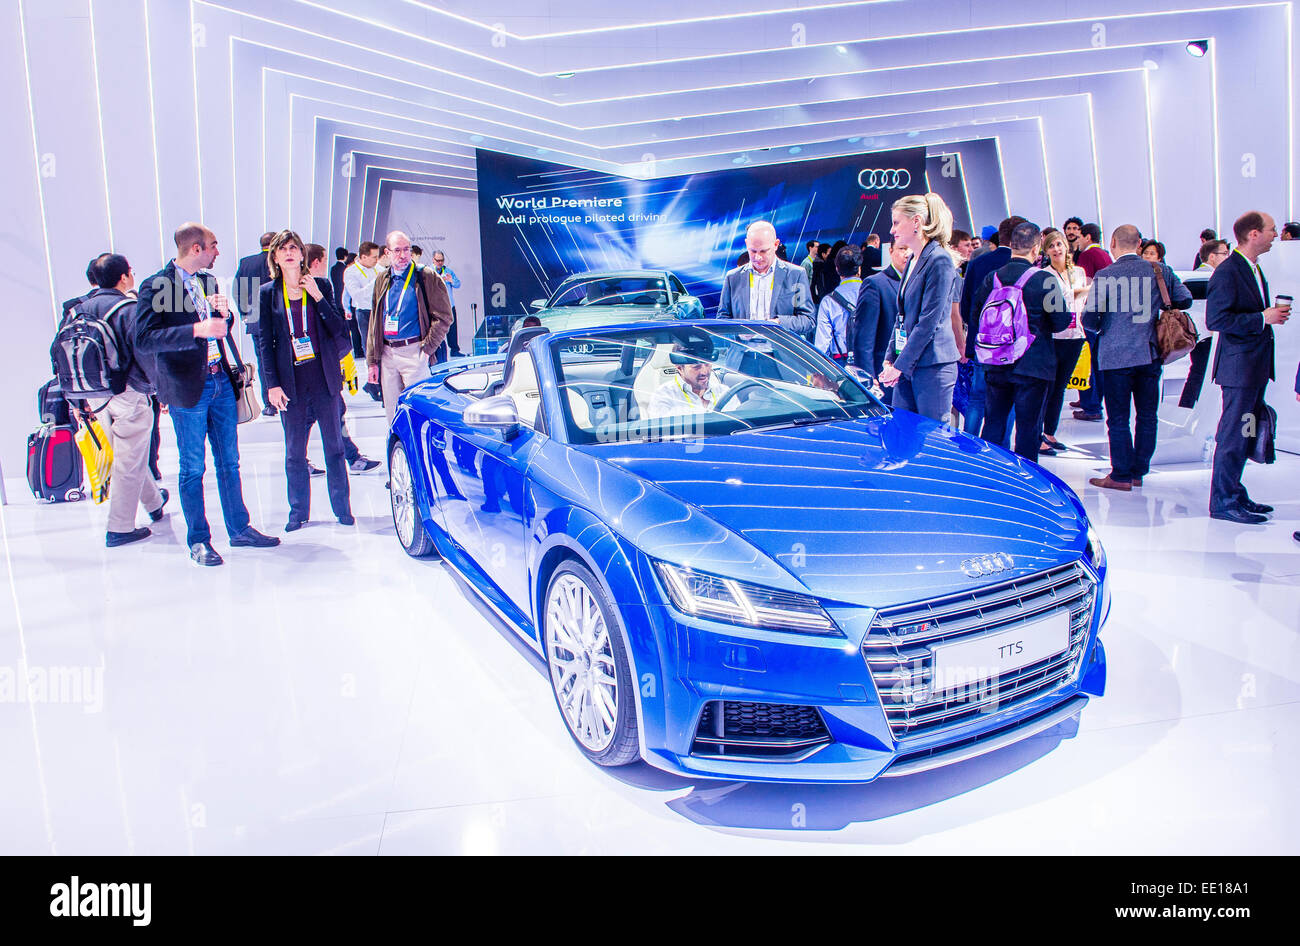 The Audi AG Prologue concept vehicle at the CES Show in Las Vegas Stock Photo